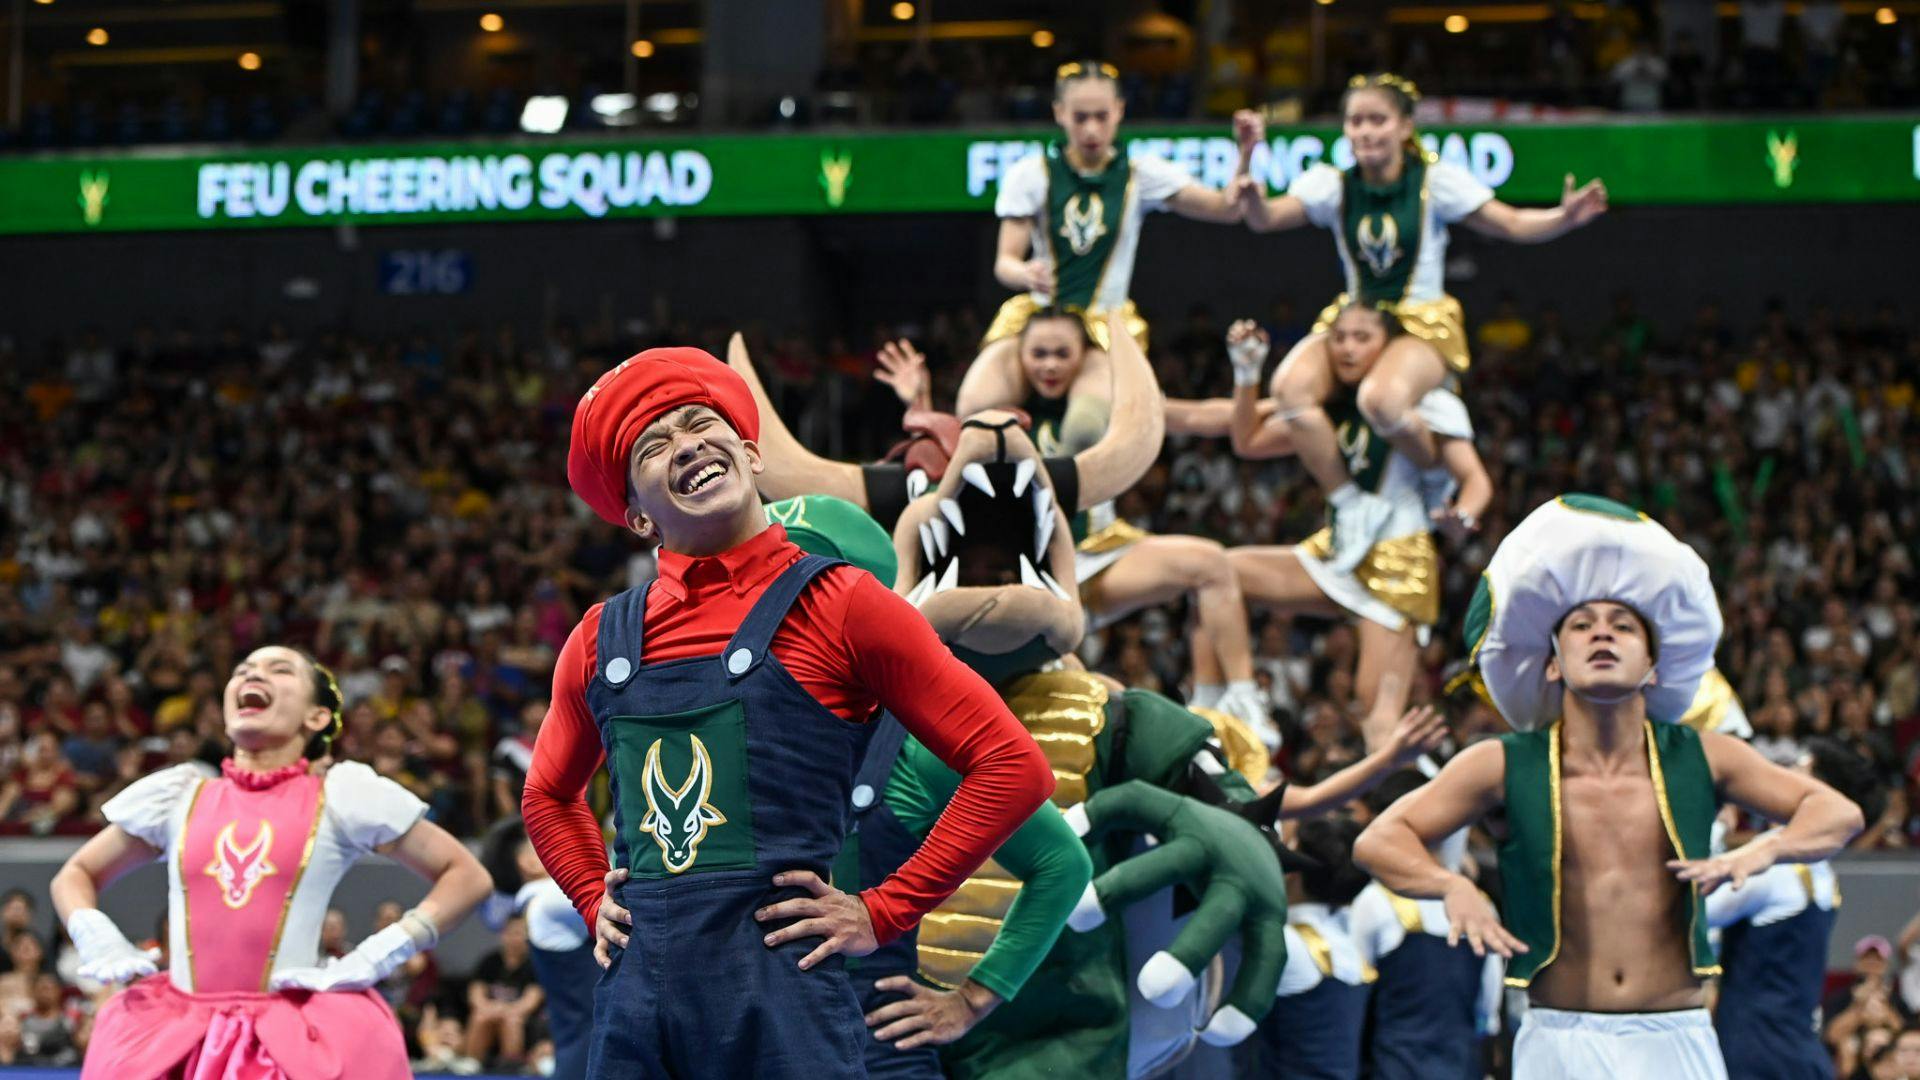 UAAP Cheerdance Competition crown returns to Morayta after FEU’s electric Super Mario-themed performance